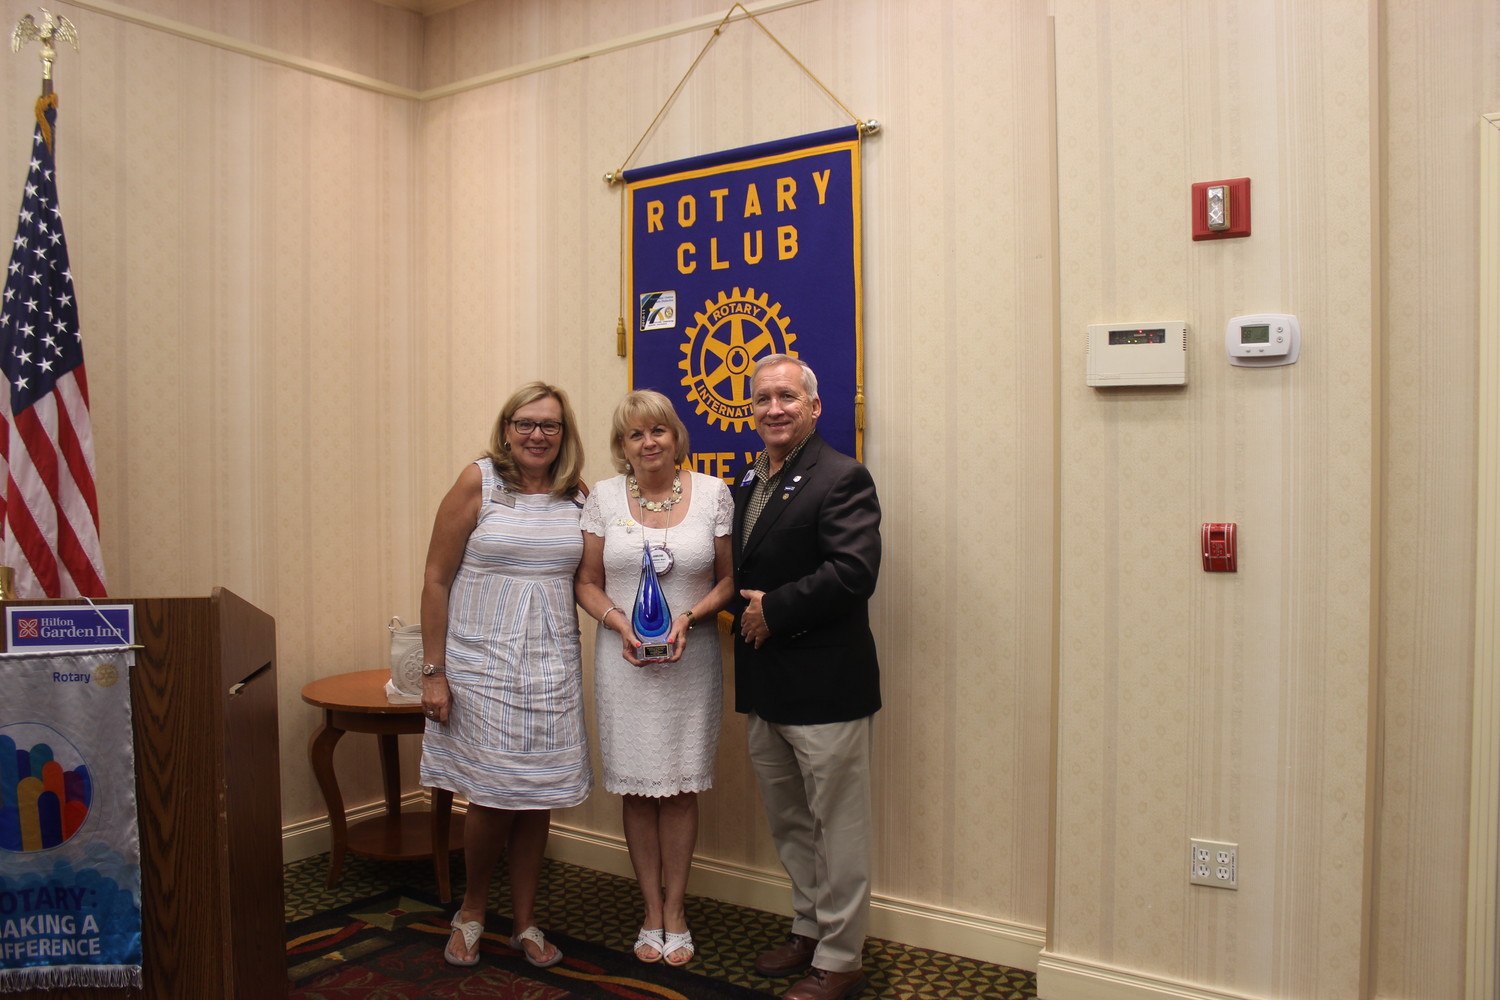 Rotary Club of Ponte Vedra Beach Sunset member Janeene Hart (center) receives the “Making a Difference” award from Club President Cyndi King and District 6970 Governor Brent Coates.